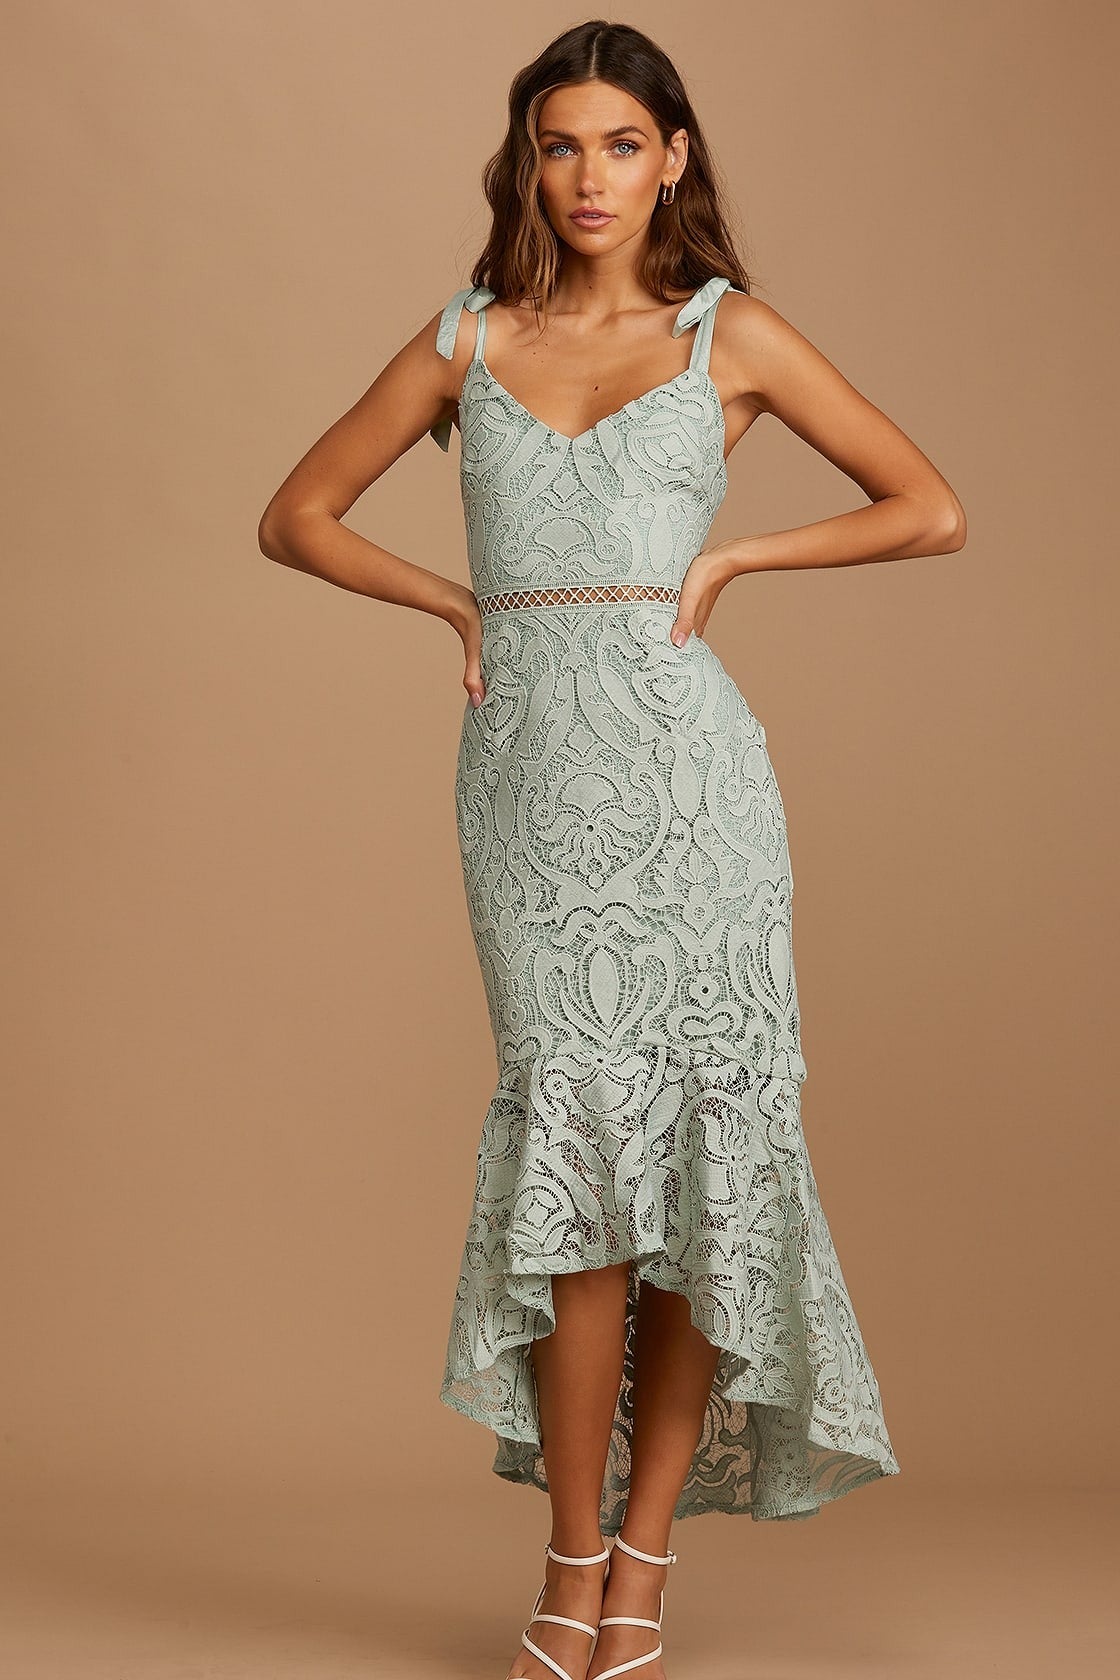 41 Stunning Wedding Guest Dresses Perfect For The Wedding You Just RSVP’d To